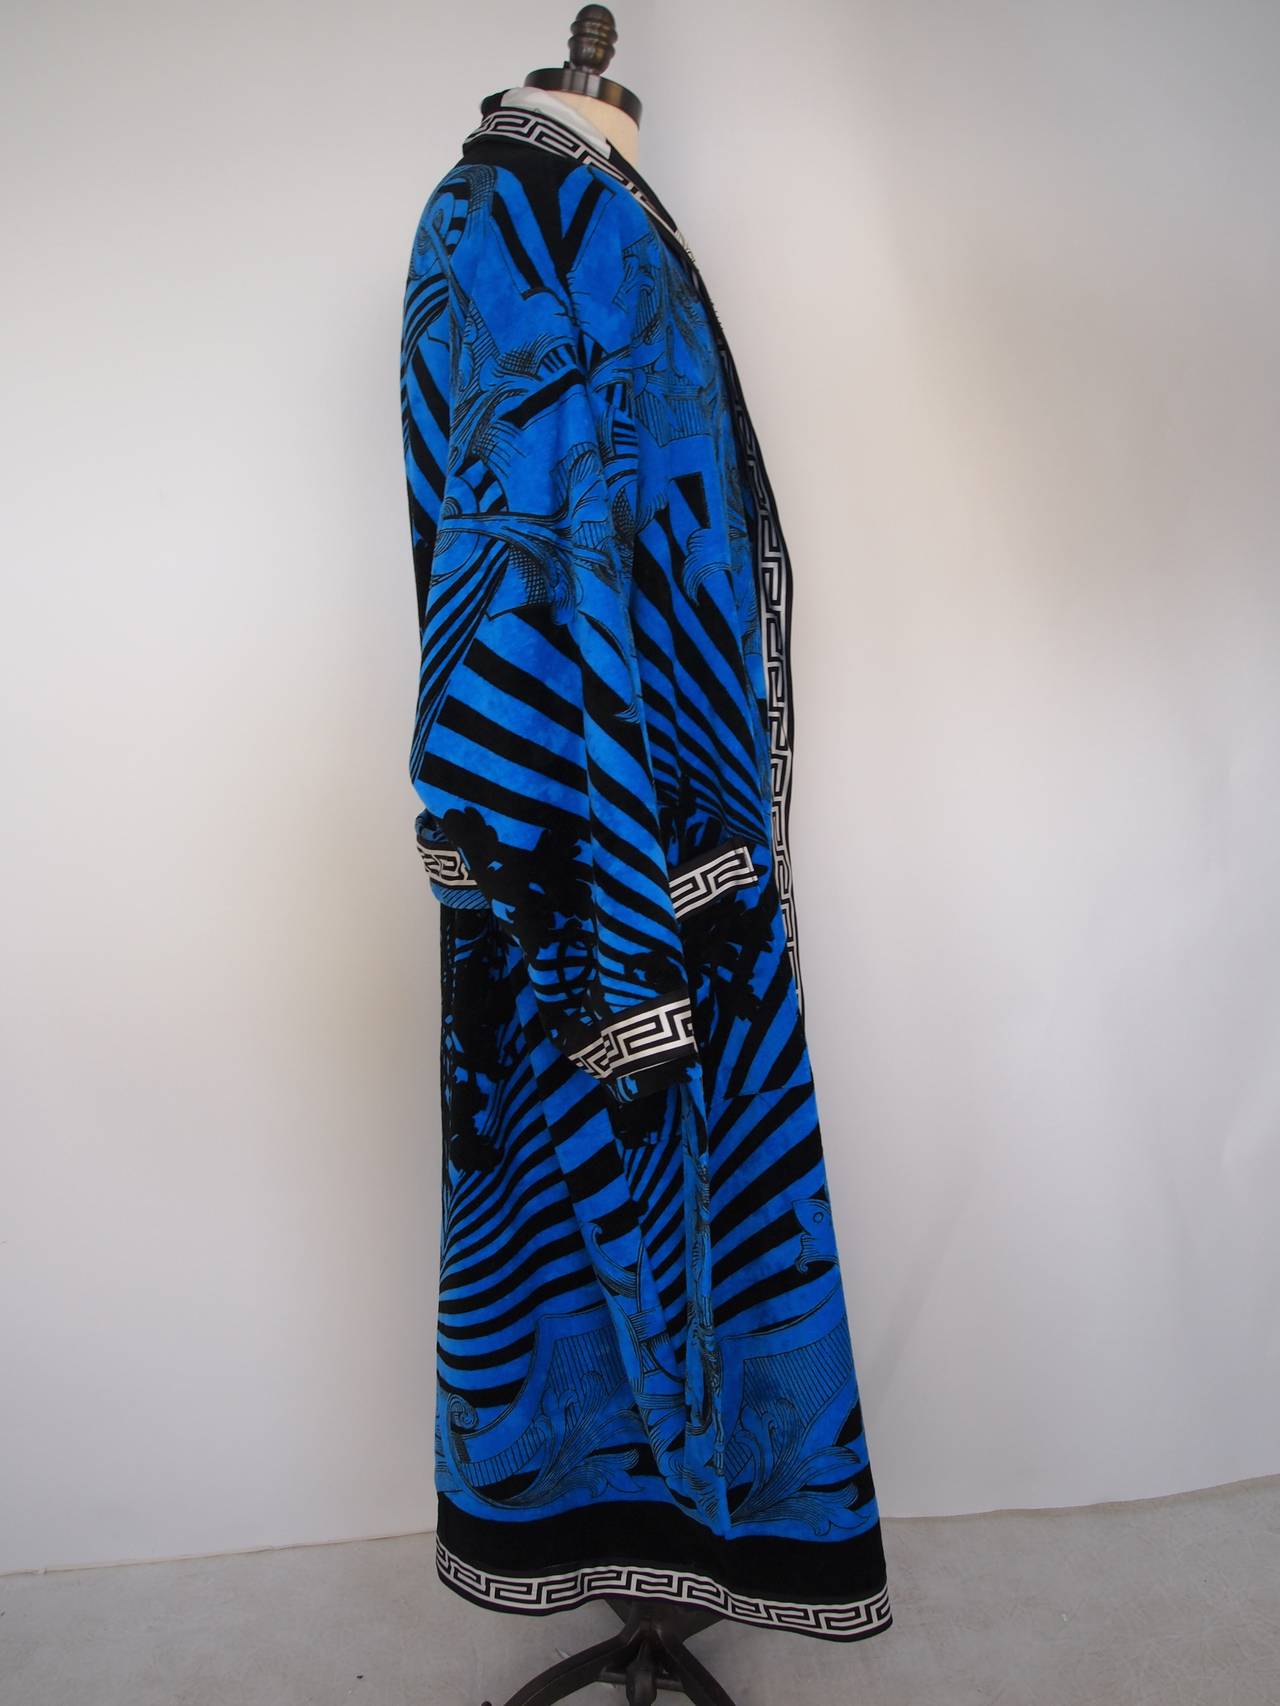 Versace Spring 2012 men's blue, black and white terrycloth Versace robe de chambre with abstract baroque pattern throughout, lined silk interior and Grecian key patterned trim.
Chest 60”, Length 54